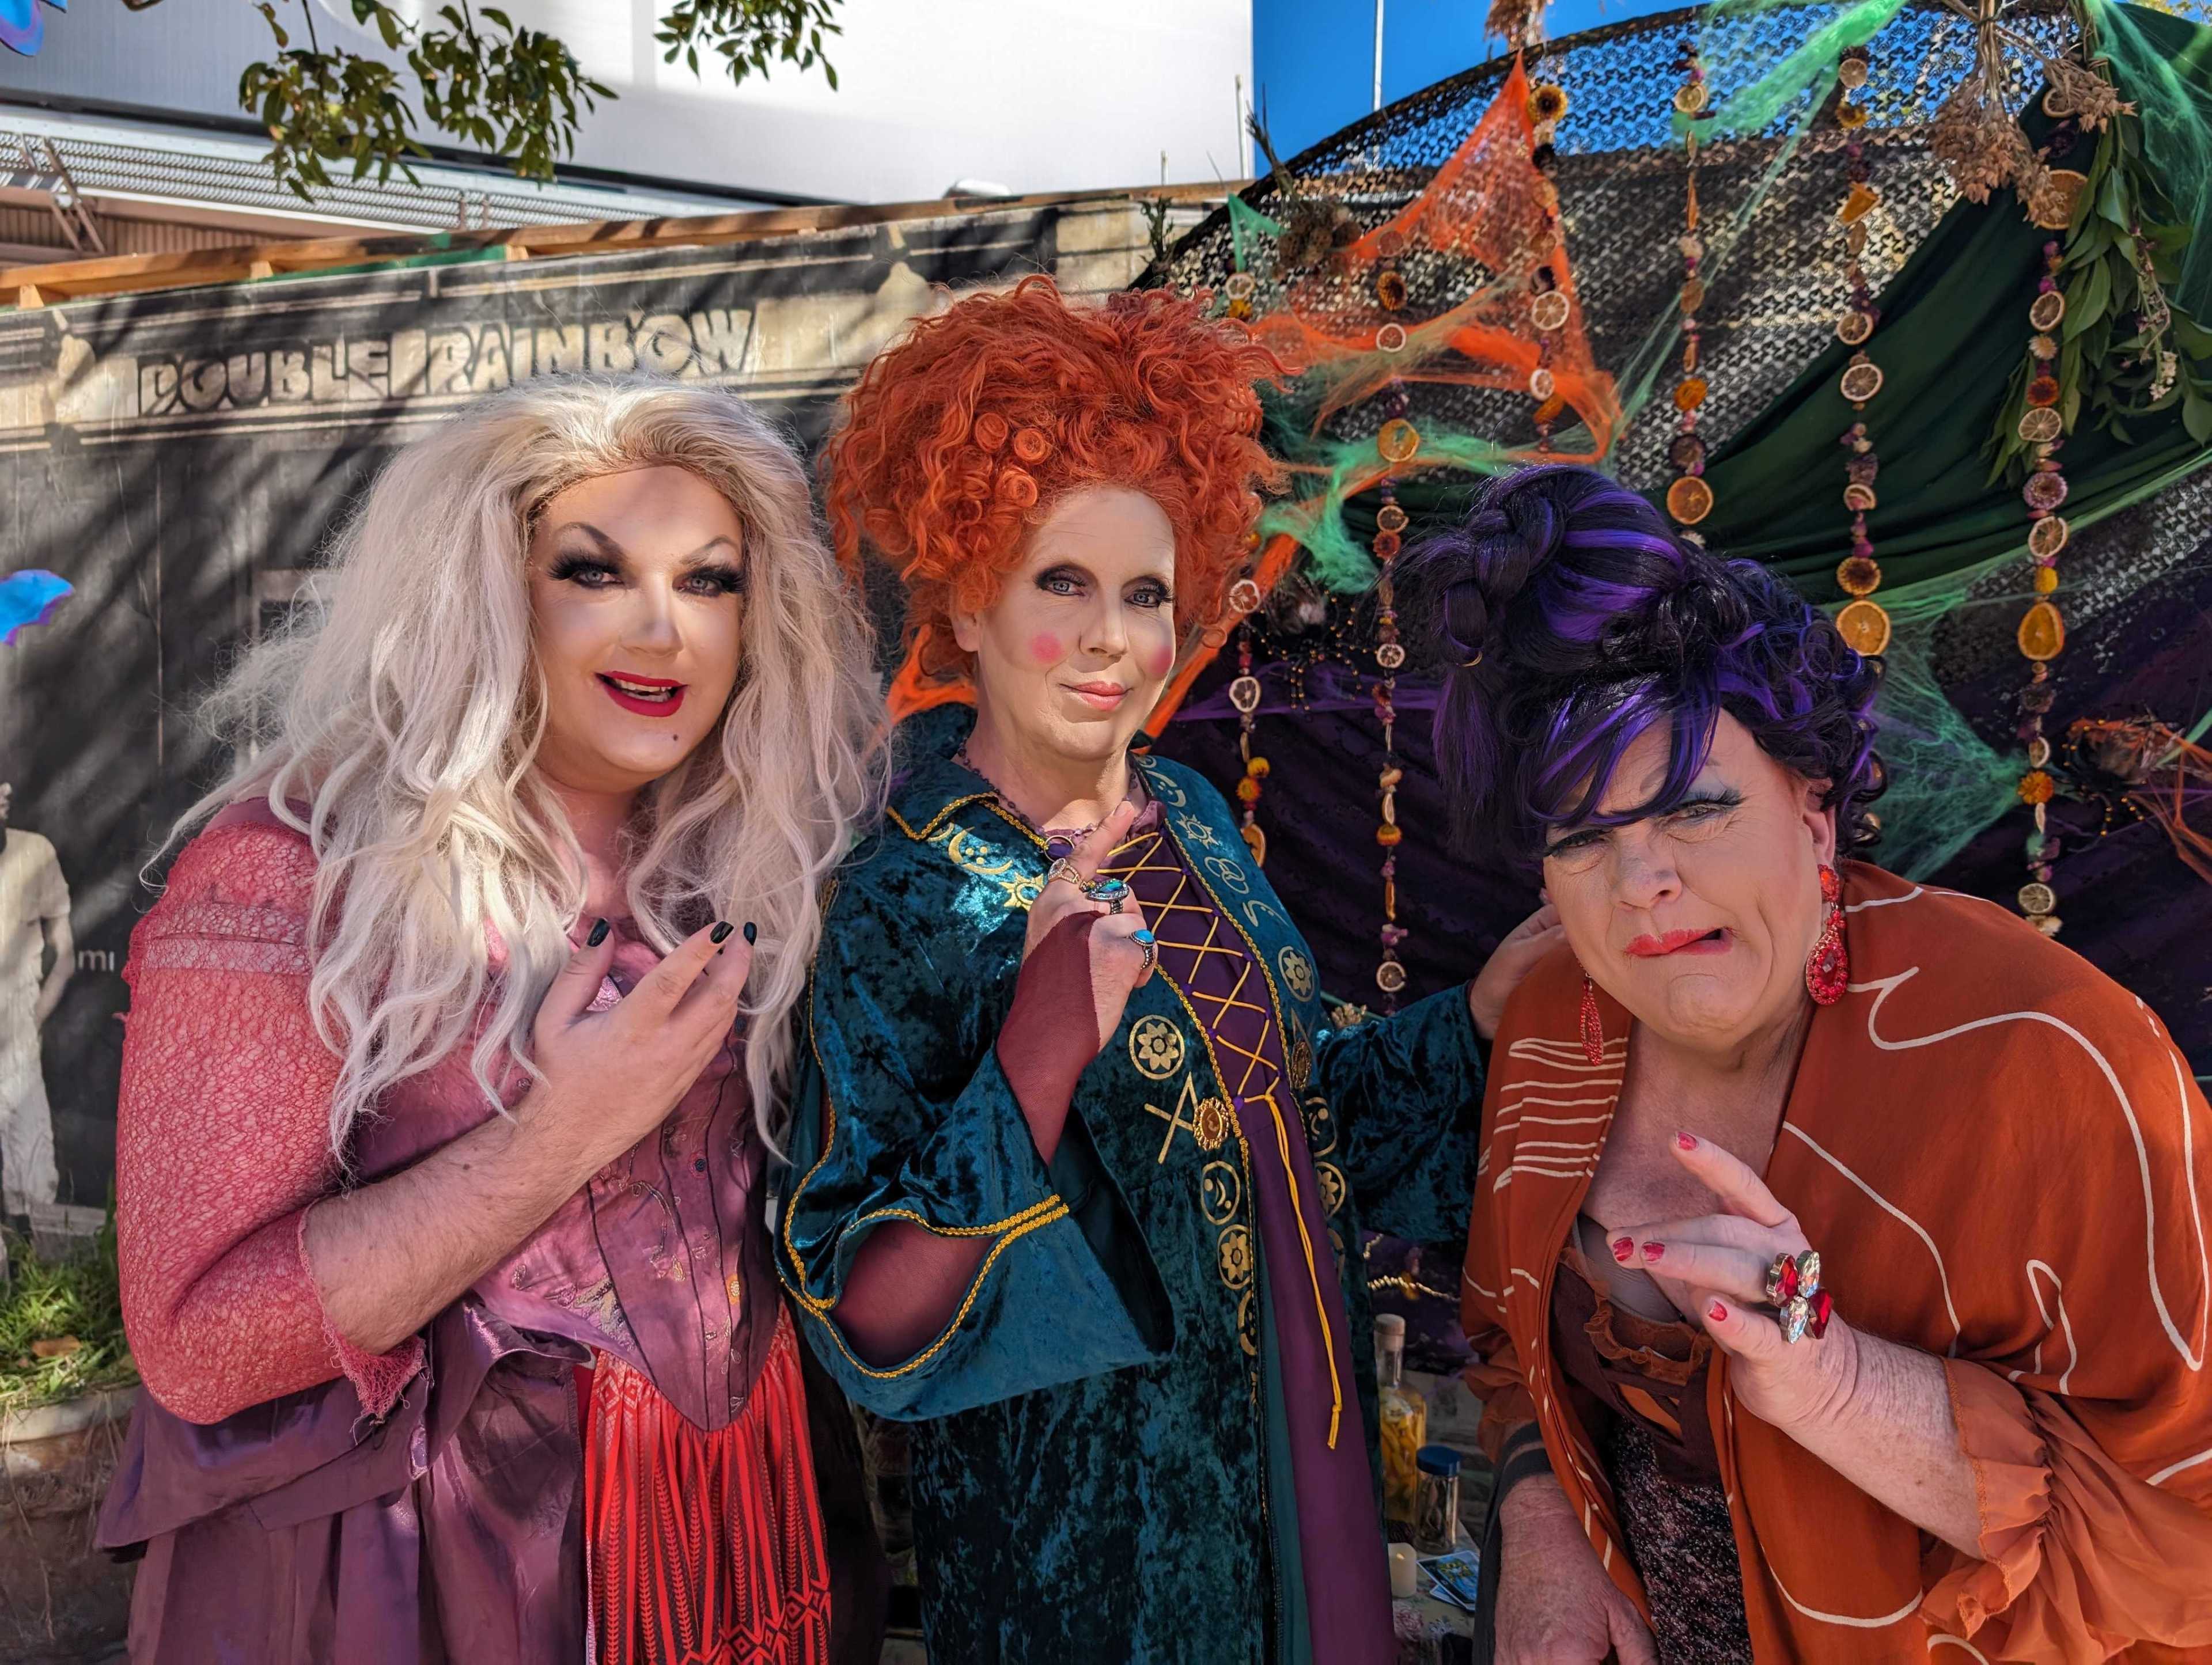 Three Queens Are We troupe members Kelly Rose, Christina Ashton and Oliva Hart handed out candy and greeted Halloween block partiers Sunday at Market and Noe streets.